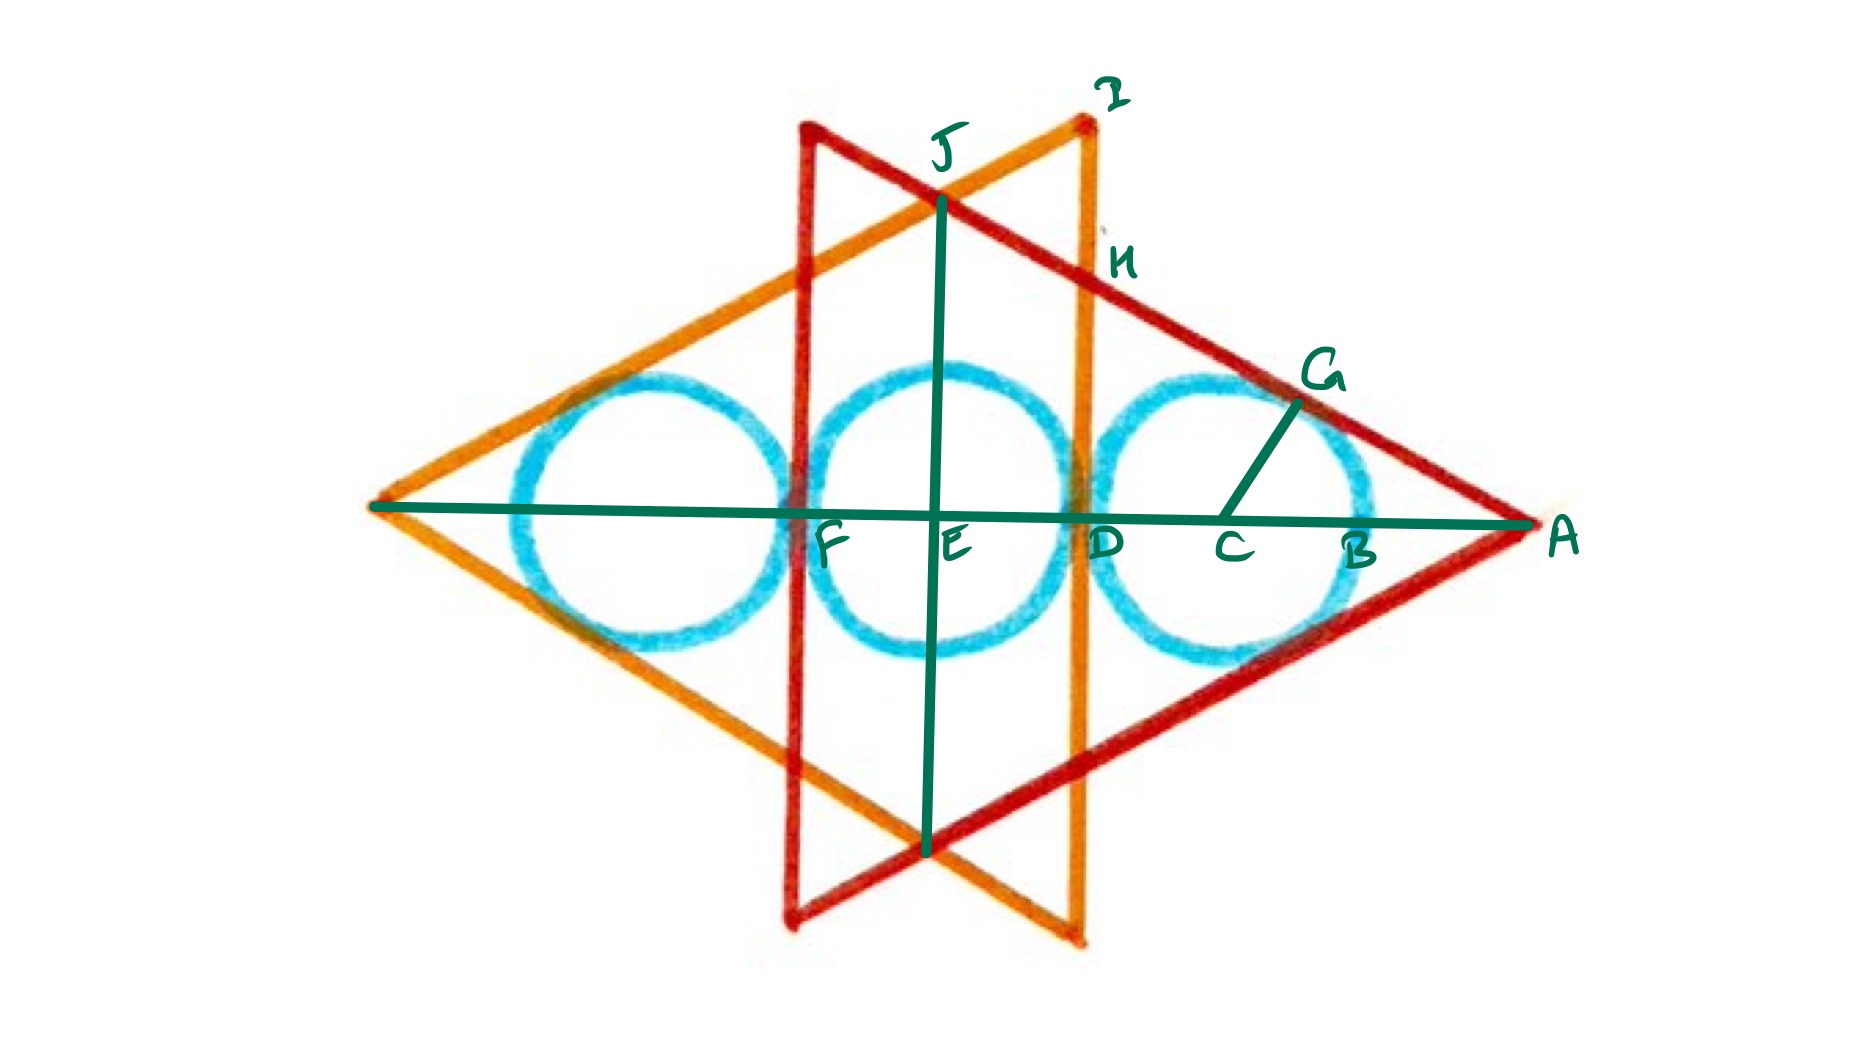 Circles in overlapping triangles labelled